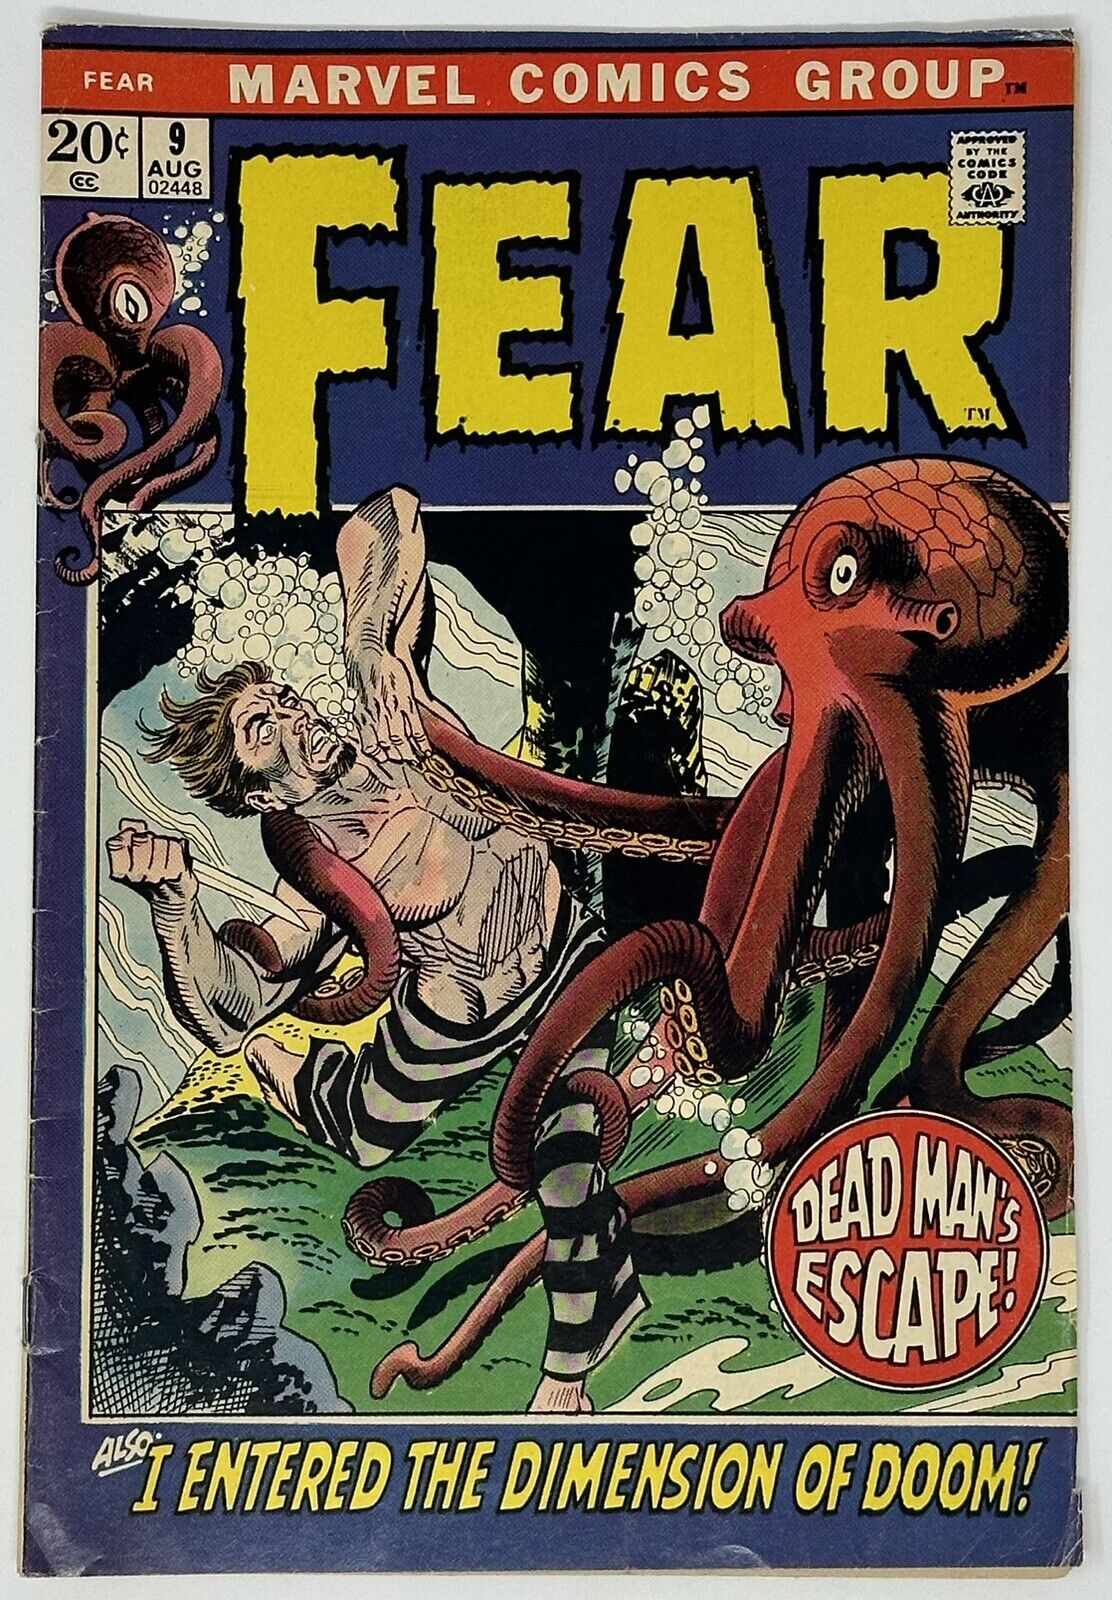 Fear Marvel Comics Group Book #9 August 1972 Issue Dead Man’s Escape